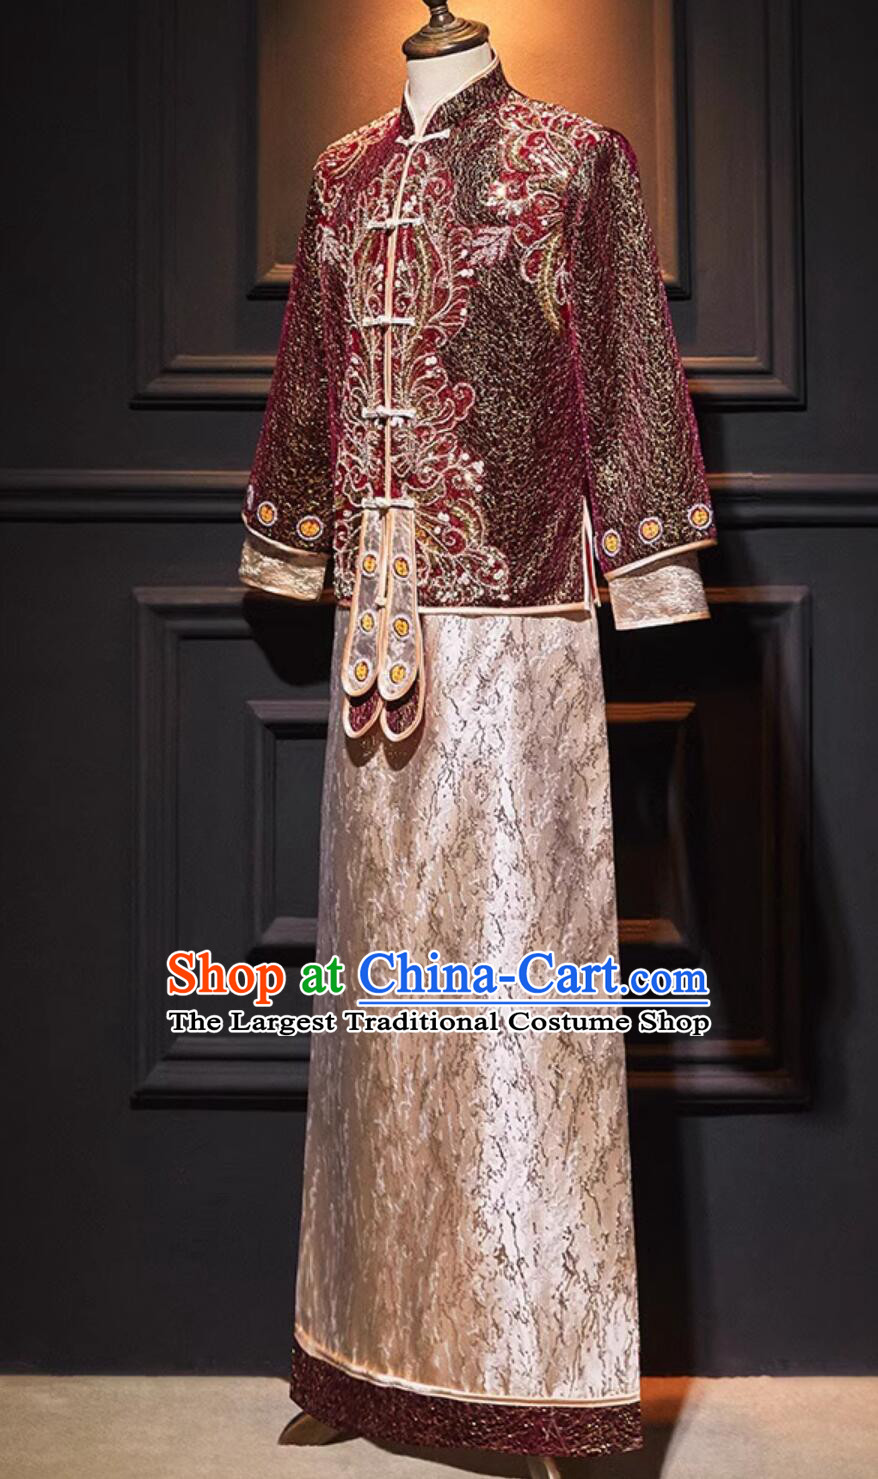 Chinese Ancient Groom Clothing Traditional Wedding Male Outfit Tang Suit Embroidered Mandarin Jacket and Long Robe Complete Set